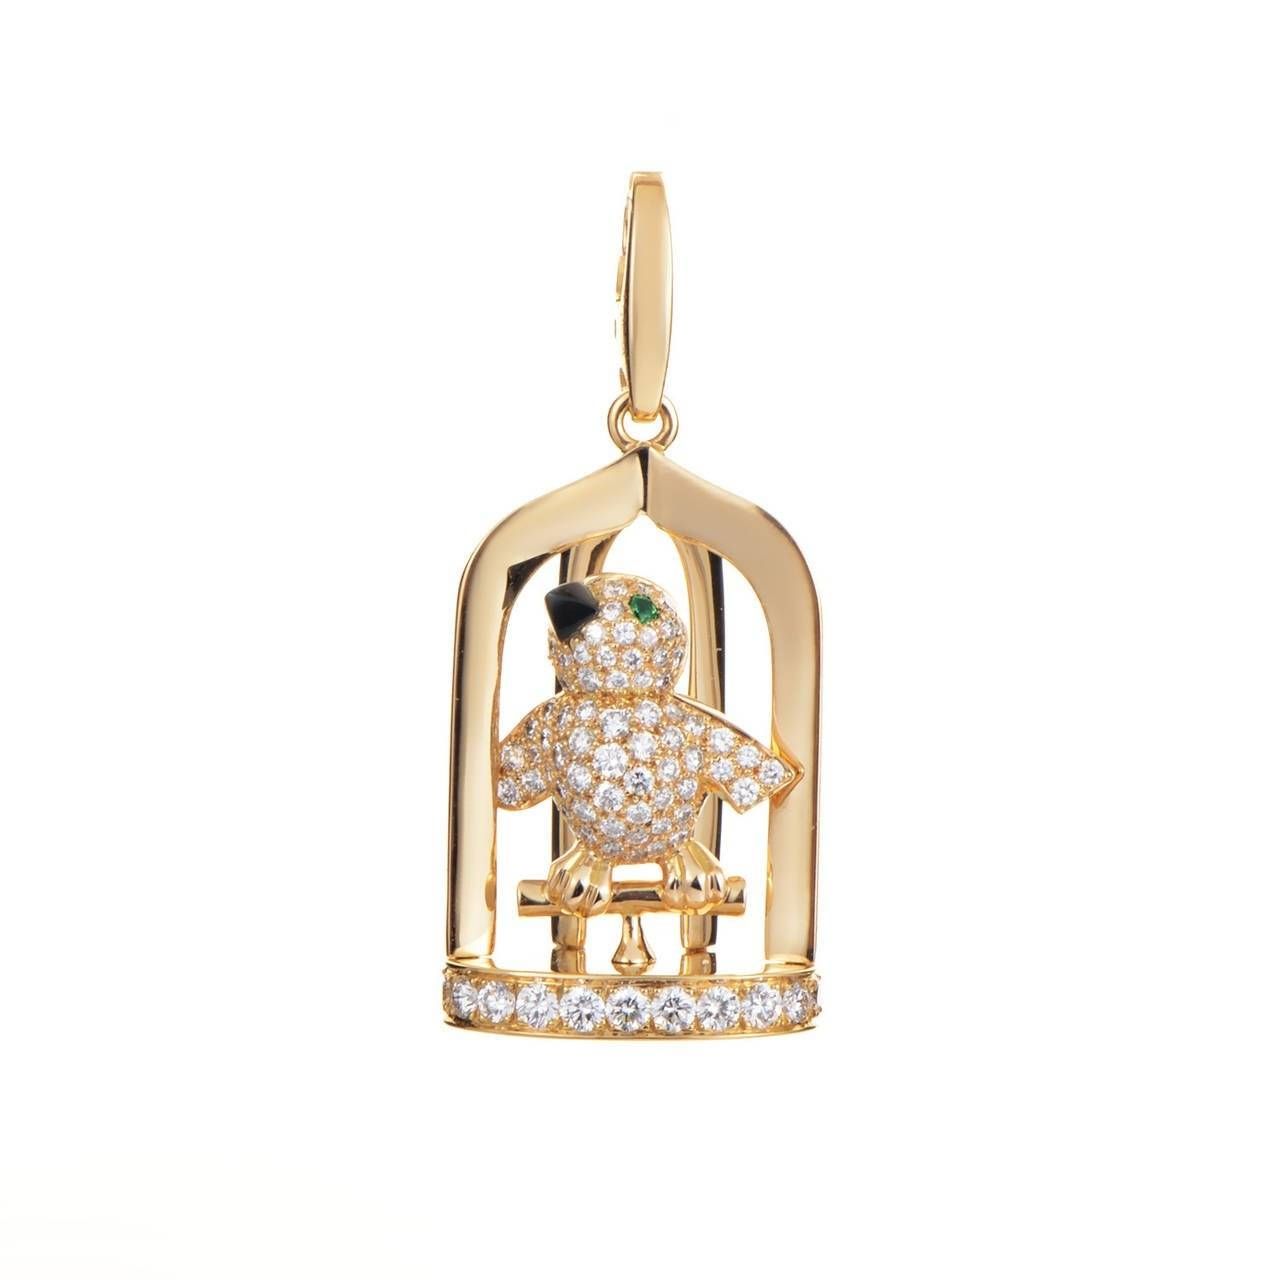 Cartier Precious Gemstone Gold Birdcage Pendant For Sale At 1stdibs Intended For Birdcage Pendants (View 6 of 15)